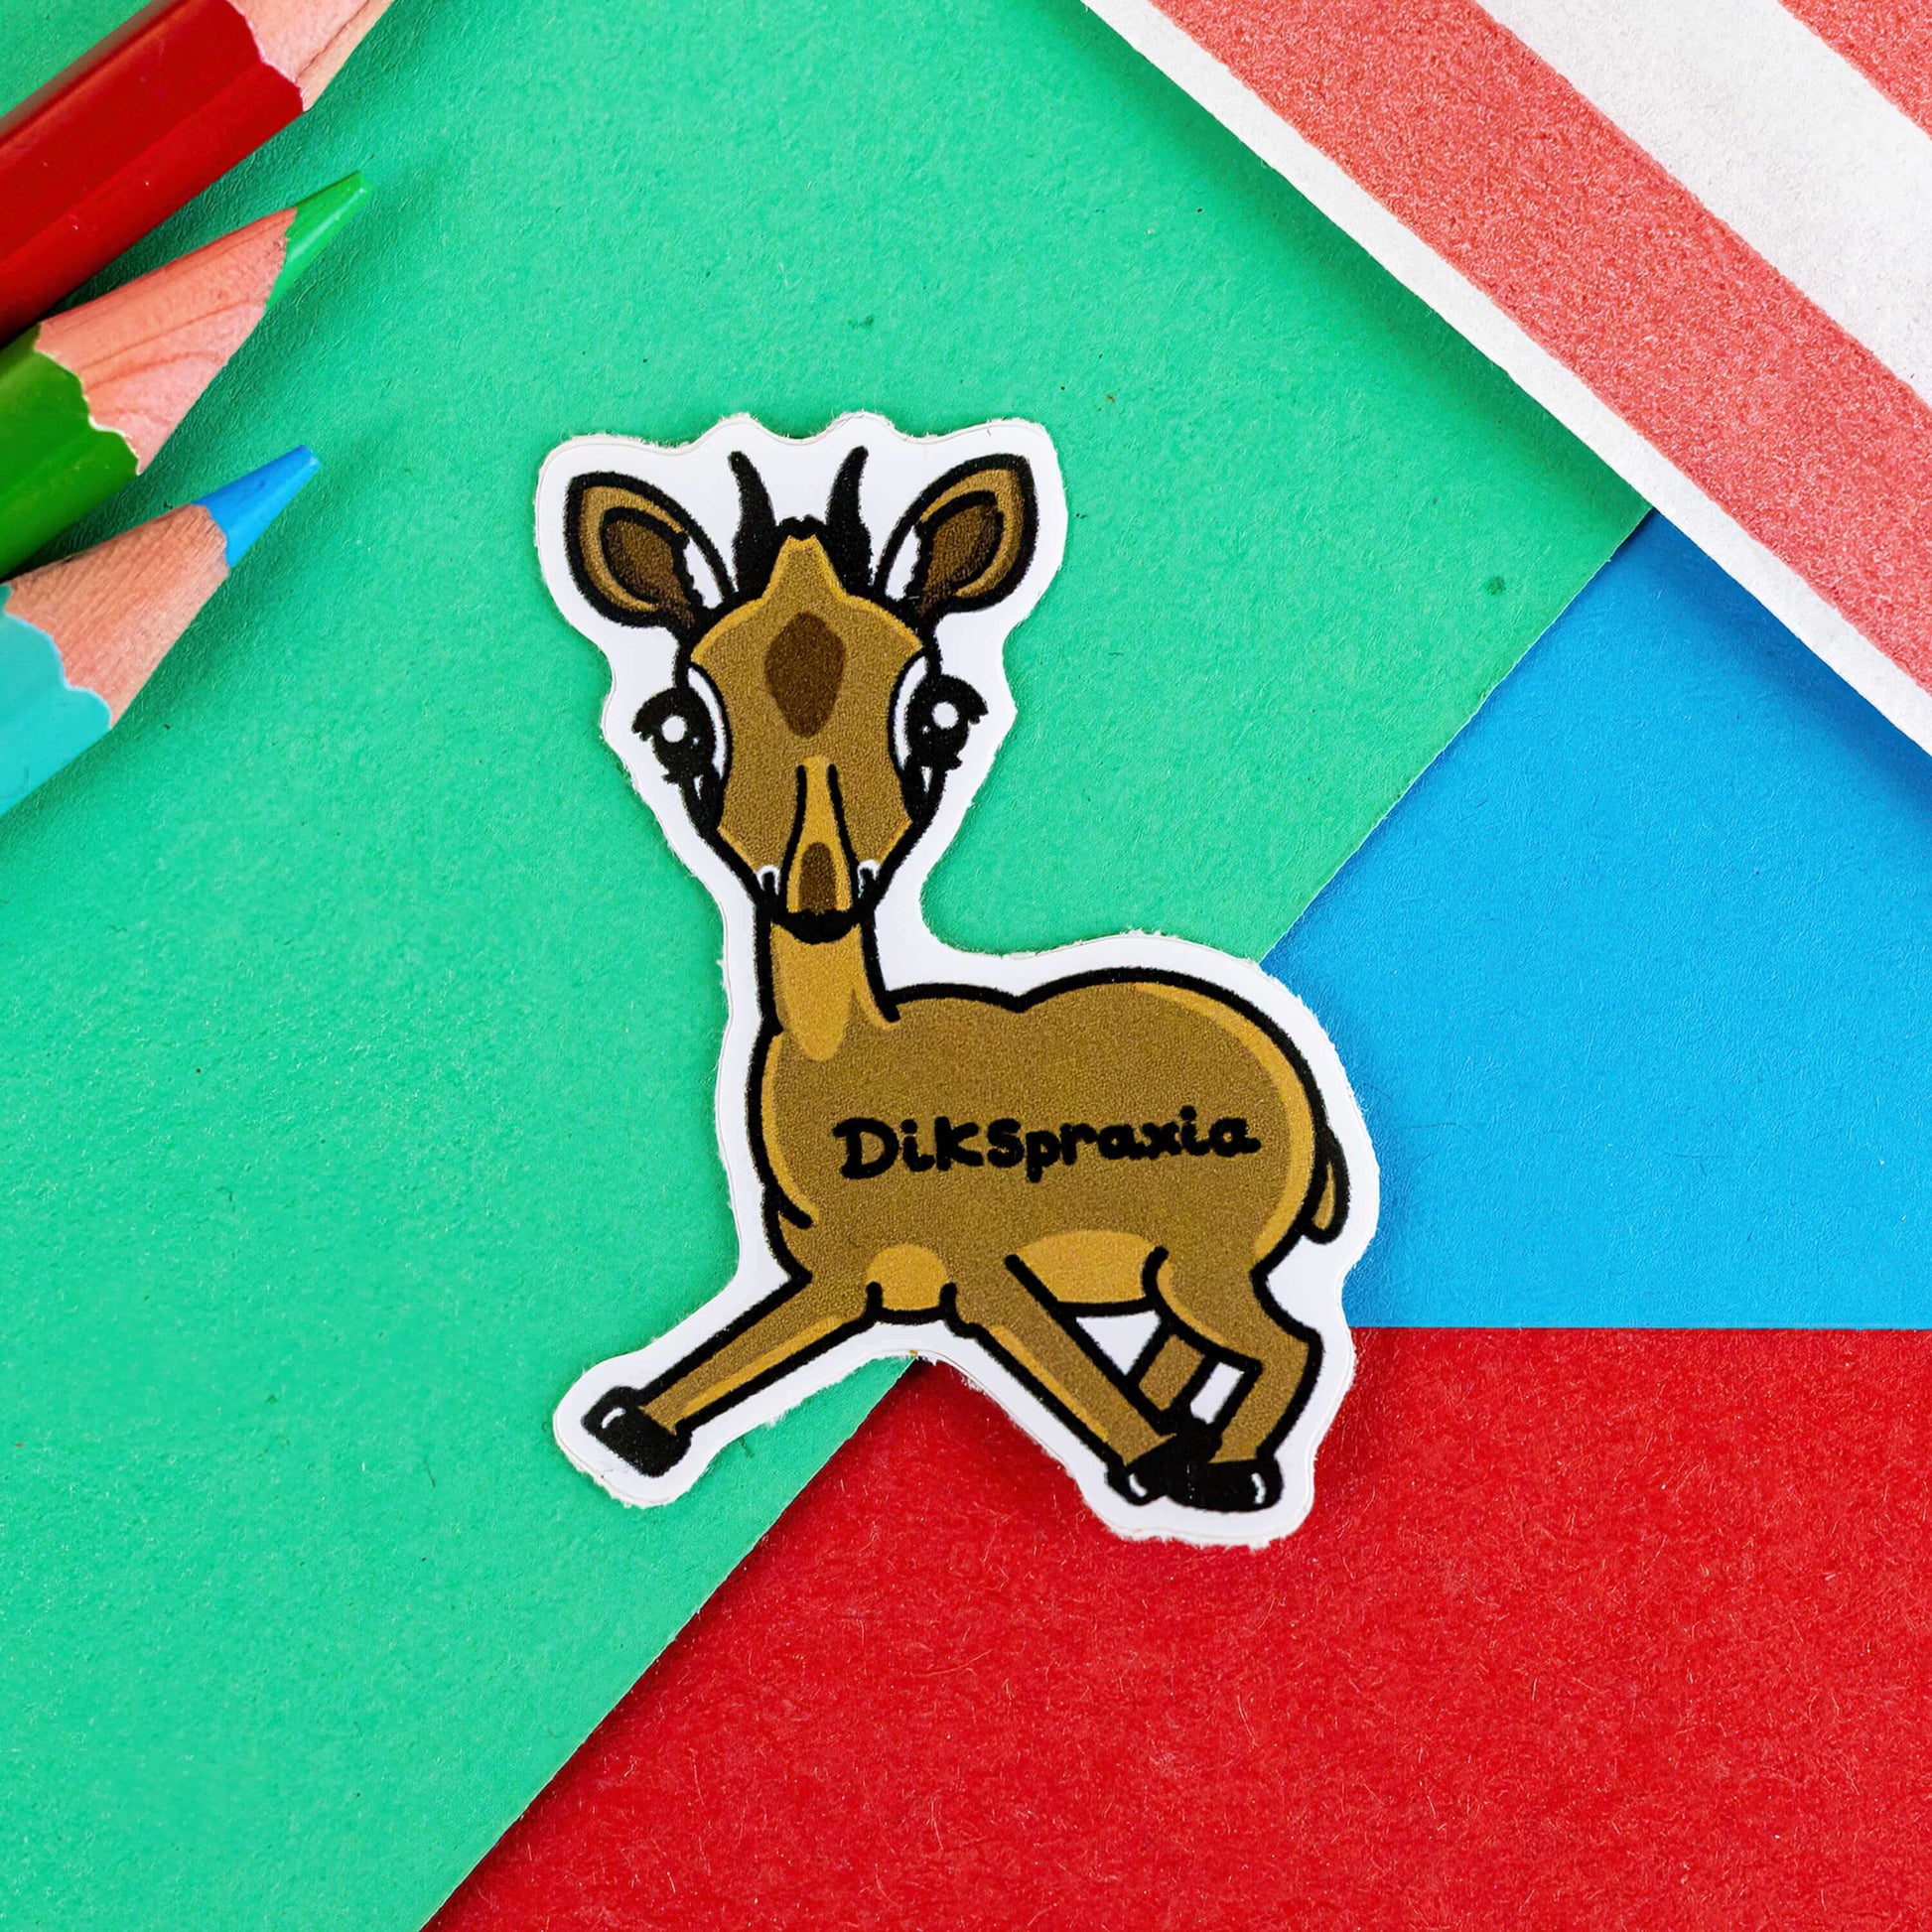 The Dikspraxia Sticker - Dyspraxia on a red, blue and green background with a red stripe candy bag and colouring pencils. The brown dik dik antelope shaped sticker has its two front legs splayed chaotically with black text reading 'dikspraxia' across its middle. The design is raising awareness for dyspraxia and neurodivergence.